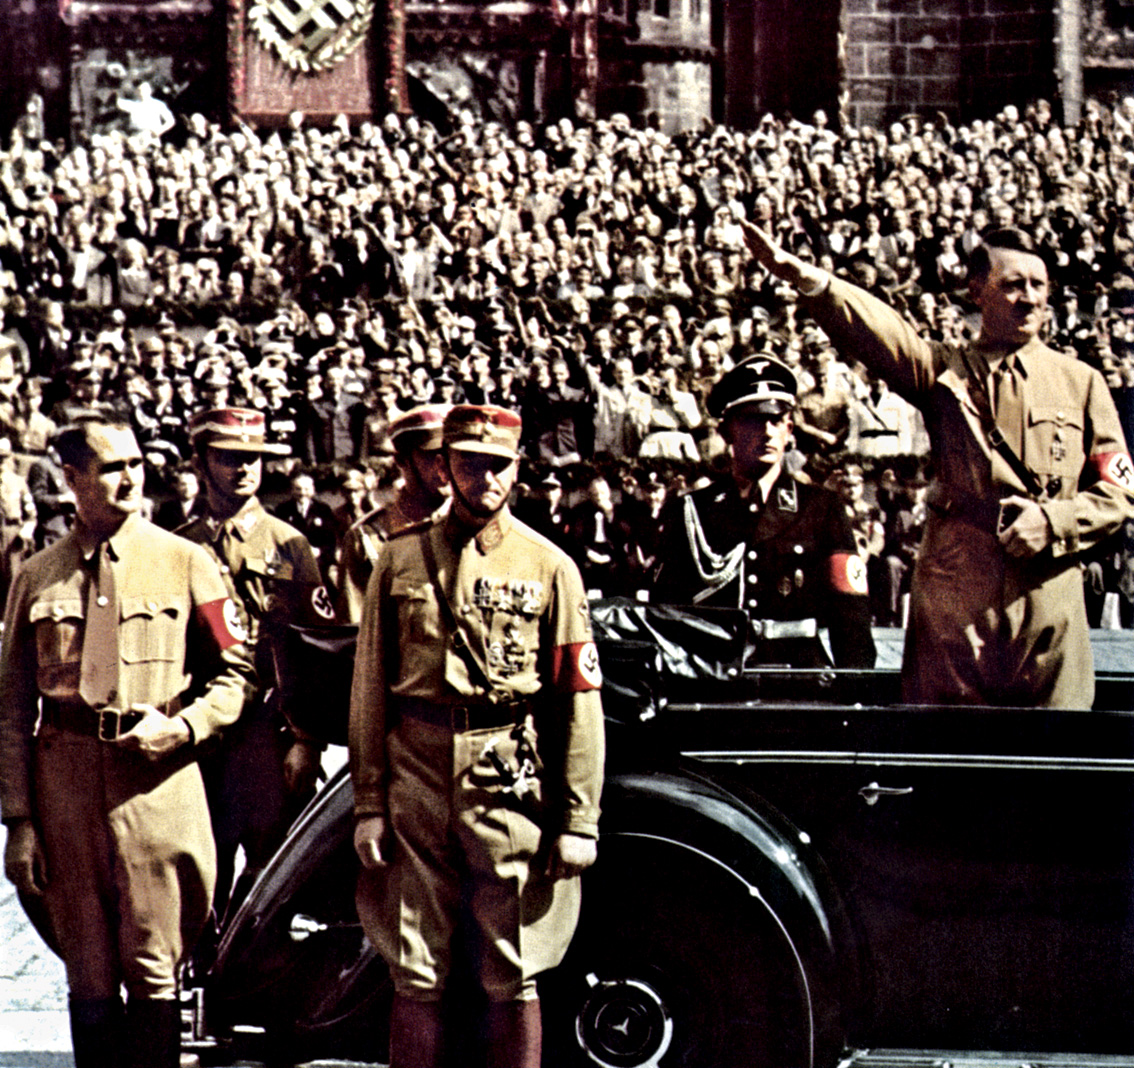 Hess, who served on Hitler’s cabinet and oversaw several departments, stands at far left beside Adolf Hitler’s Mercedes-Benz during the 1938 Nuremburg rally.